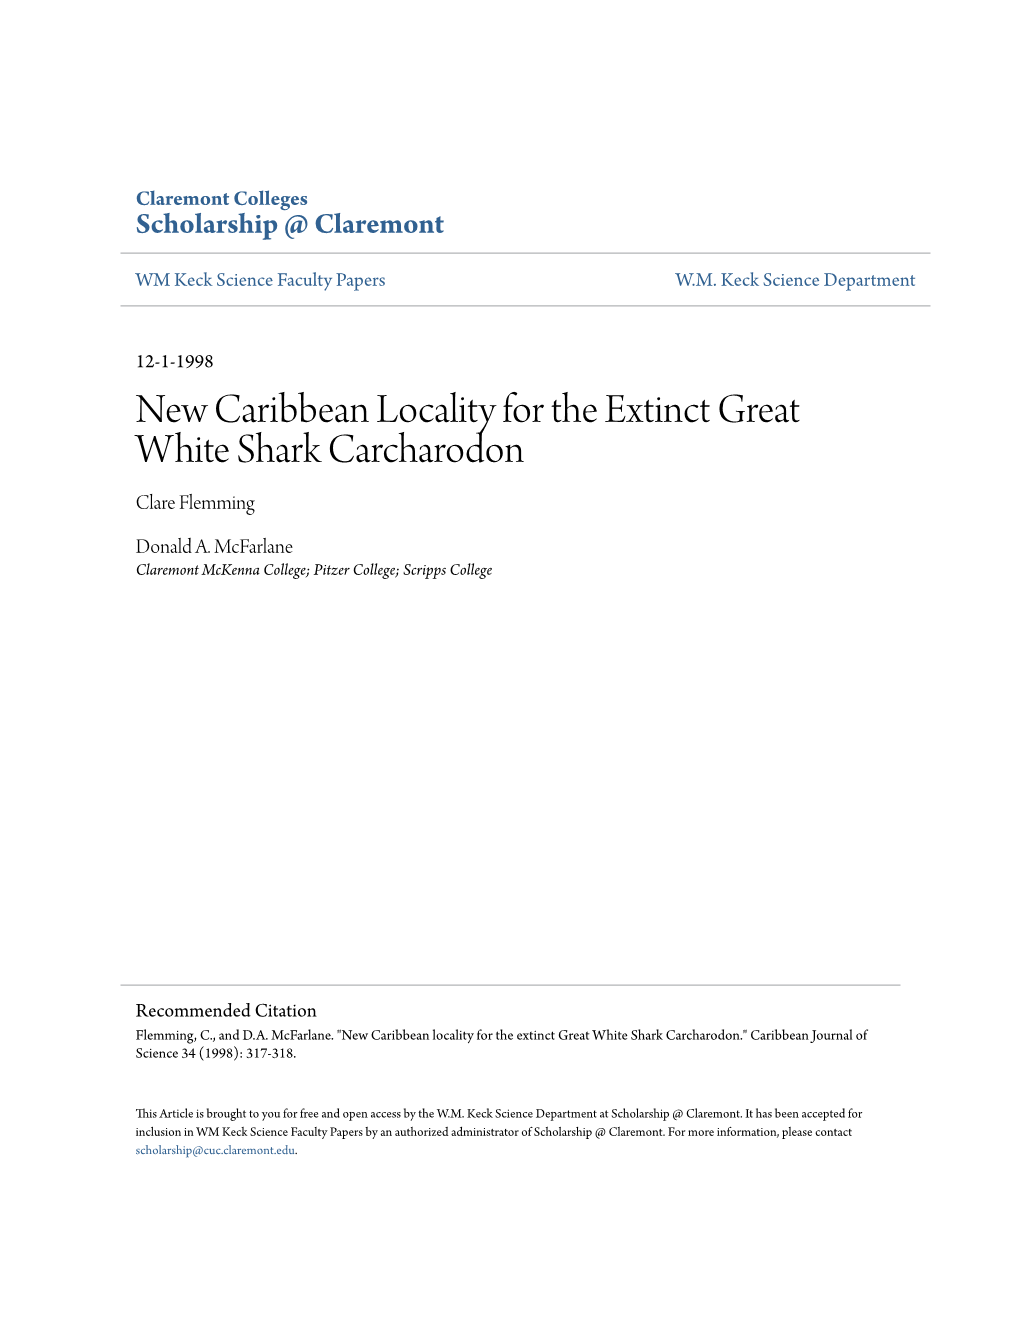 New Caribbean Locality for the Extinct Great White Shark Carcharodon Clare Flemming